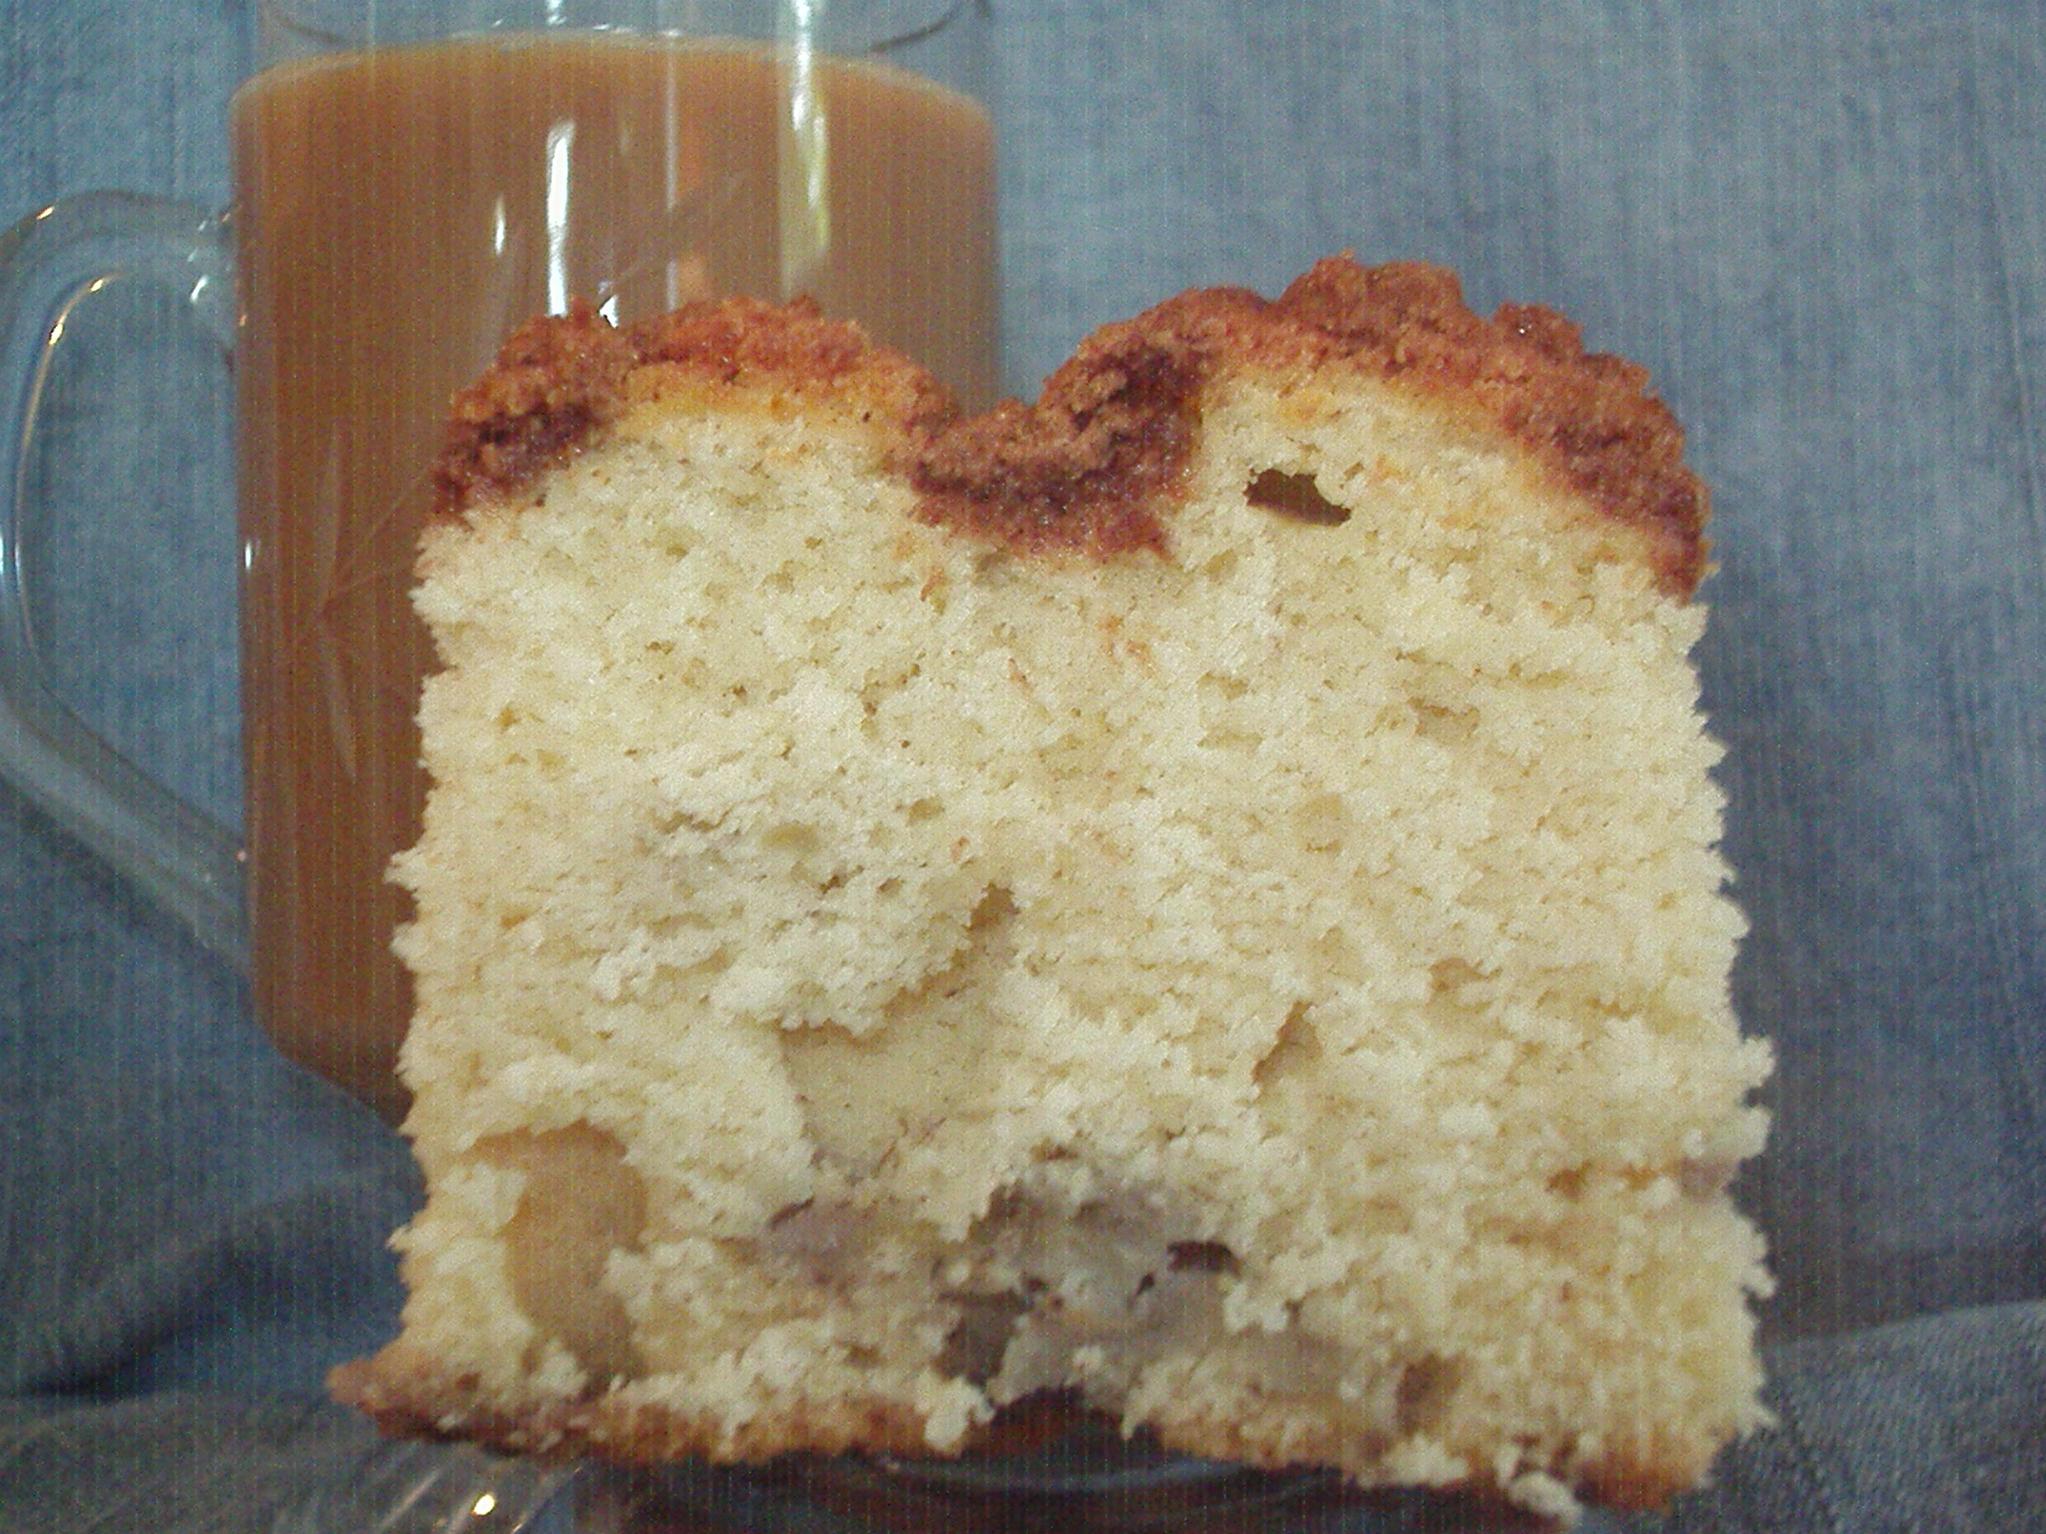  Bite into a slice of pure comfort with this Banana Streusel Coffee Cake.